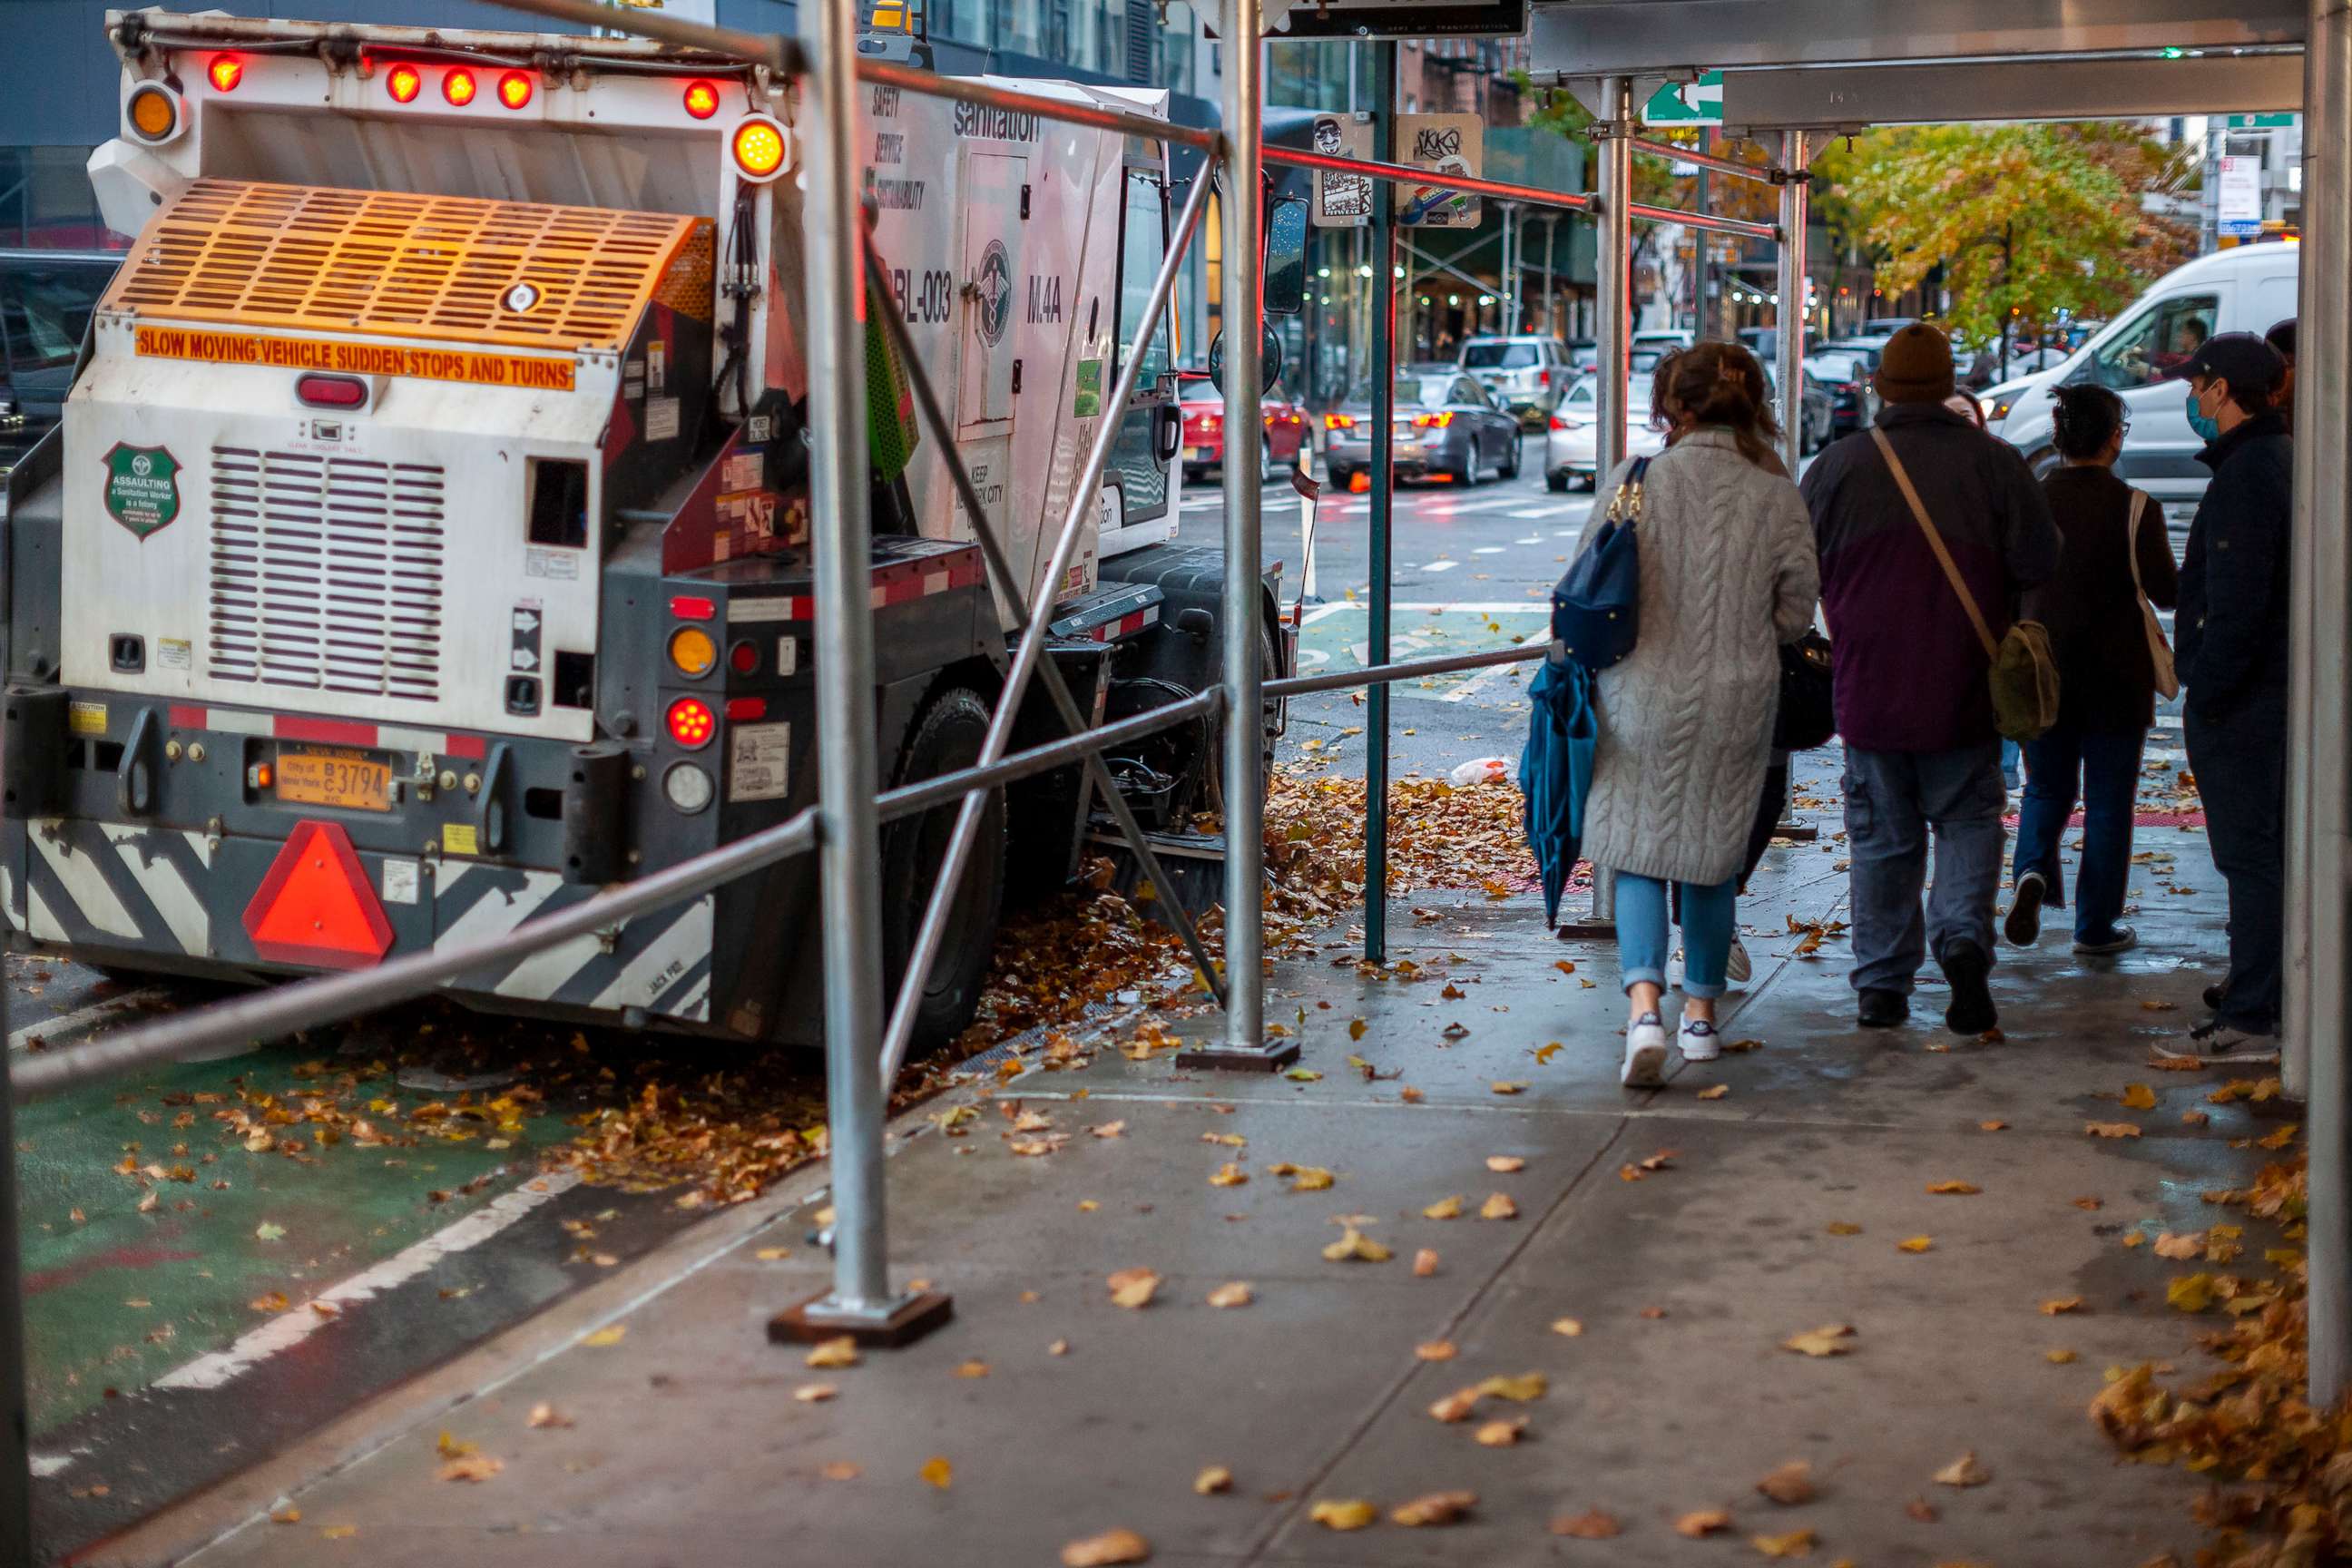 PHOTO: A NYC Dept. of Sanitation street sweeper gathers up fall foliage in the Chelsea neighborhood of New York City, Nov. 13, 2021/